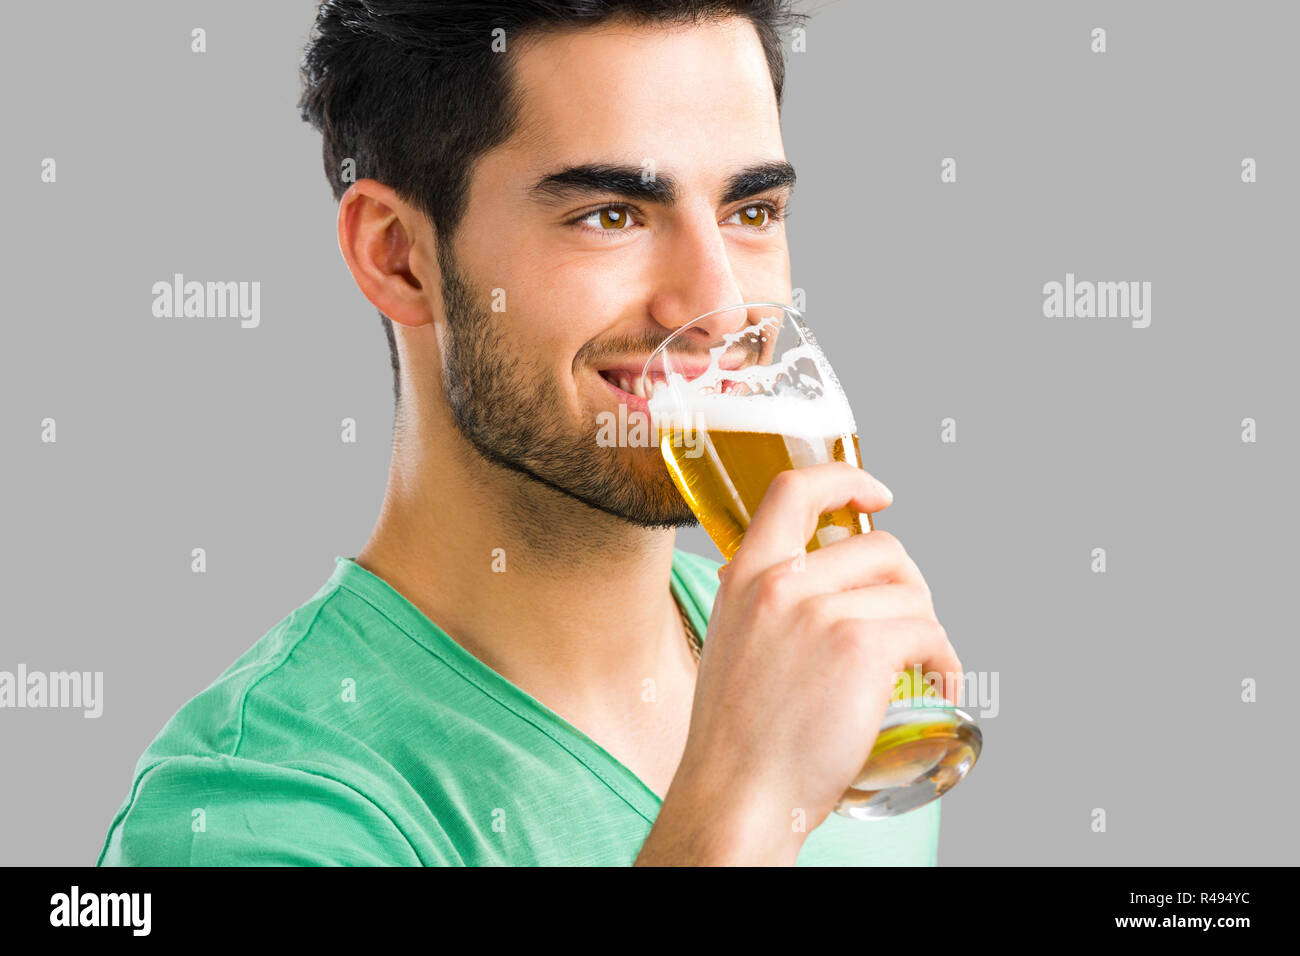 Young man drinking beer Banque D'Images